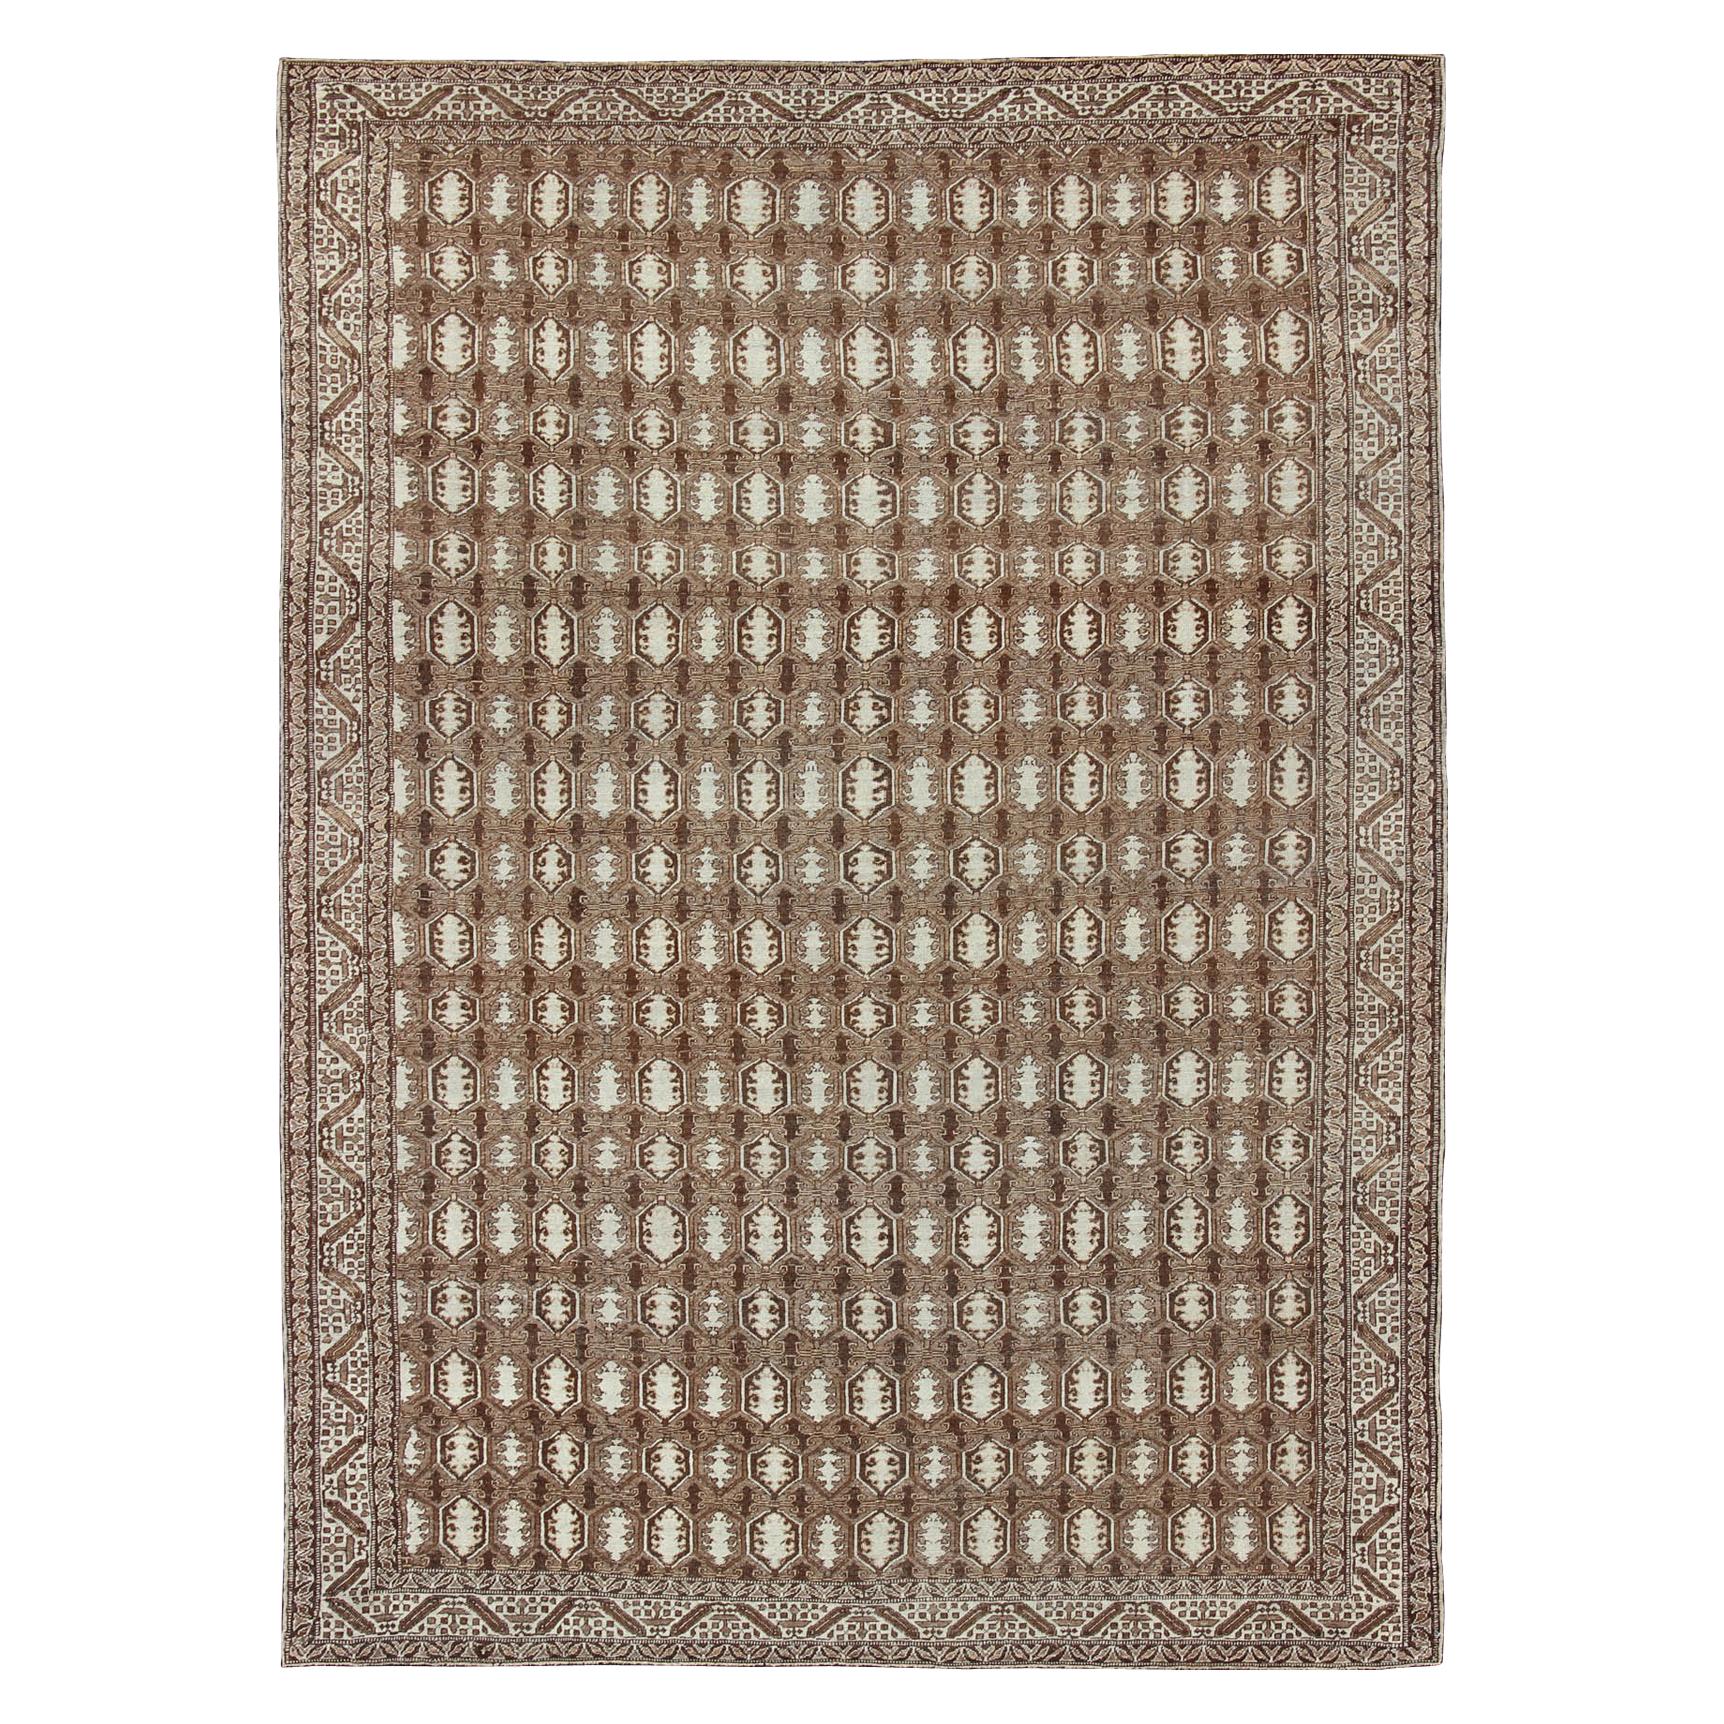 Antique Turkish Rug with Organic Motifs in Brown, Taupe, and Earth Tone Colors